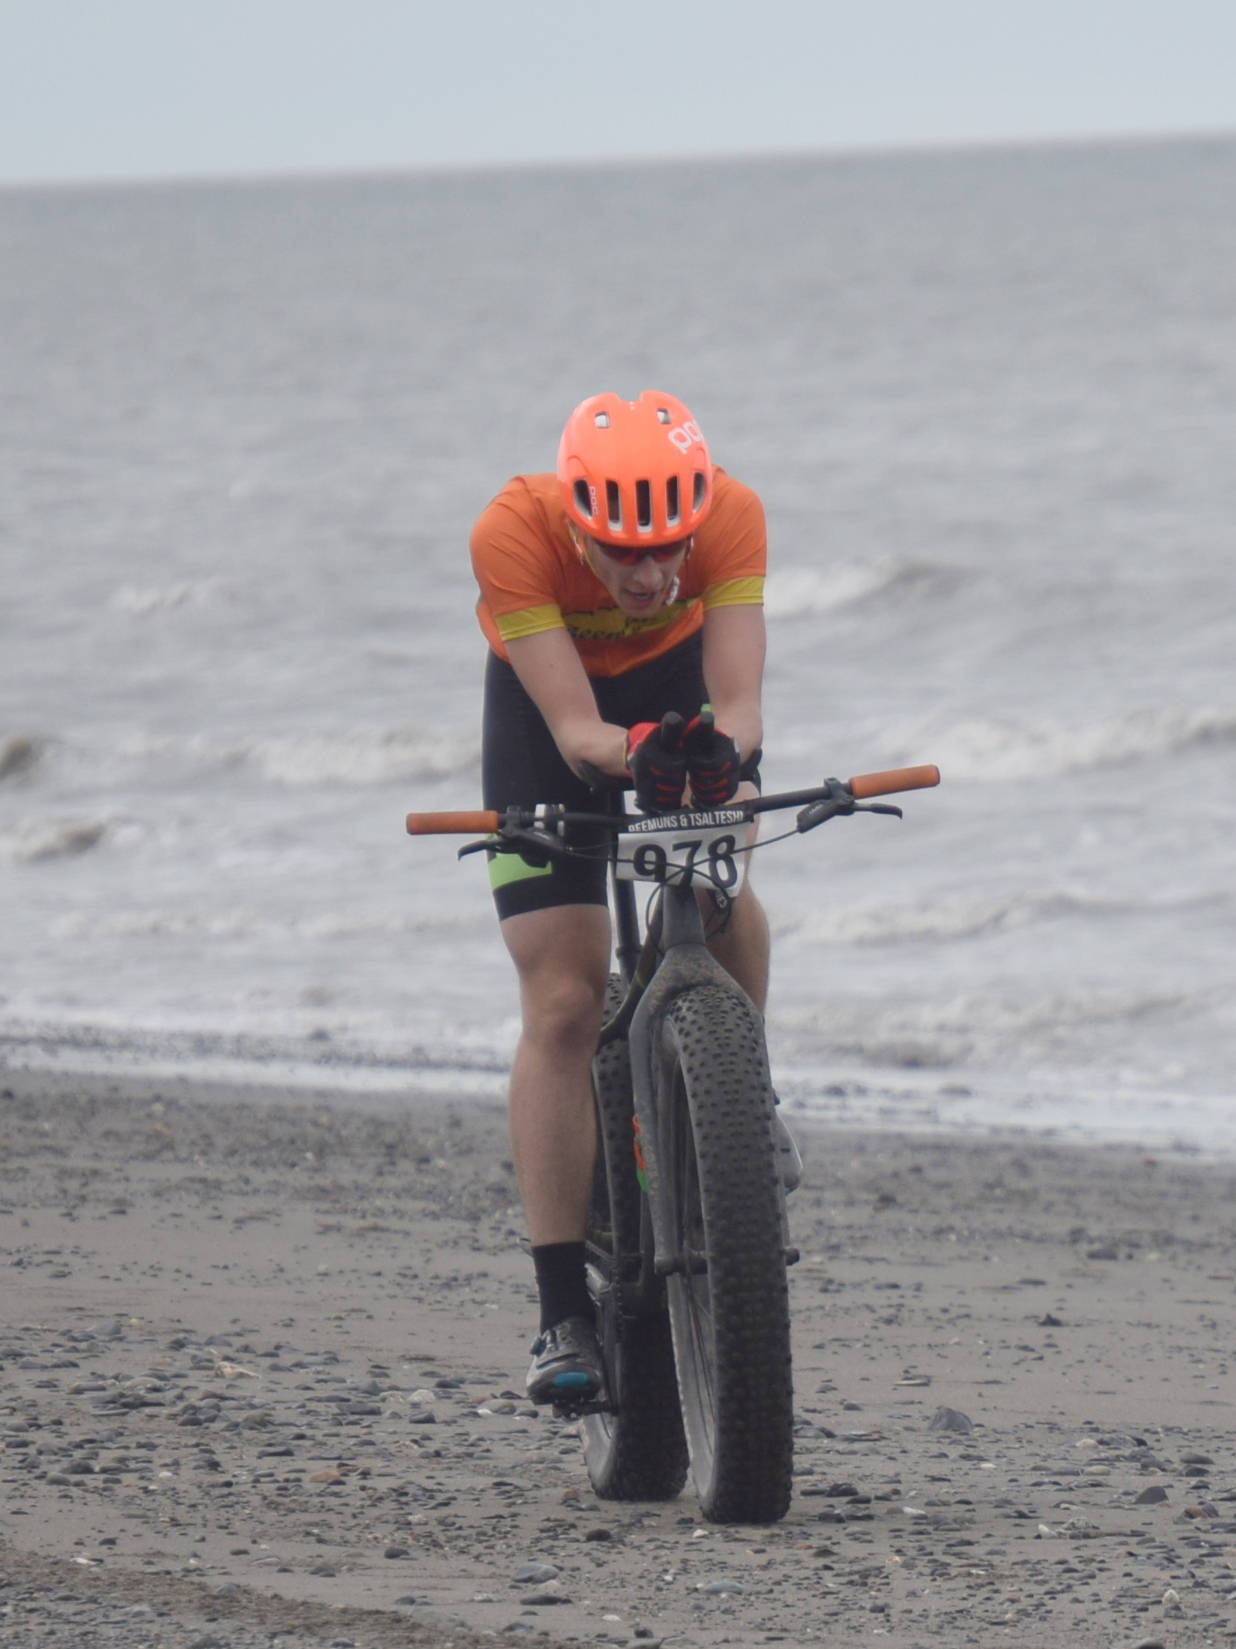 Tyle Owens rides to victory at the 10-mile bike of the Mouth to Mouth Wild Run and Ride on Monday, May 27, 2019, at the beach in Kenai, Alaska. (Photo by Jeff Helminiak/Peninsula Clarion)